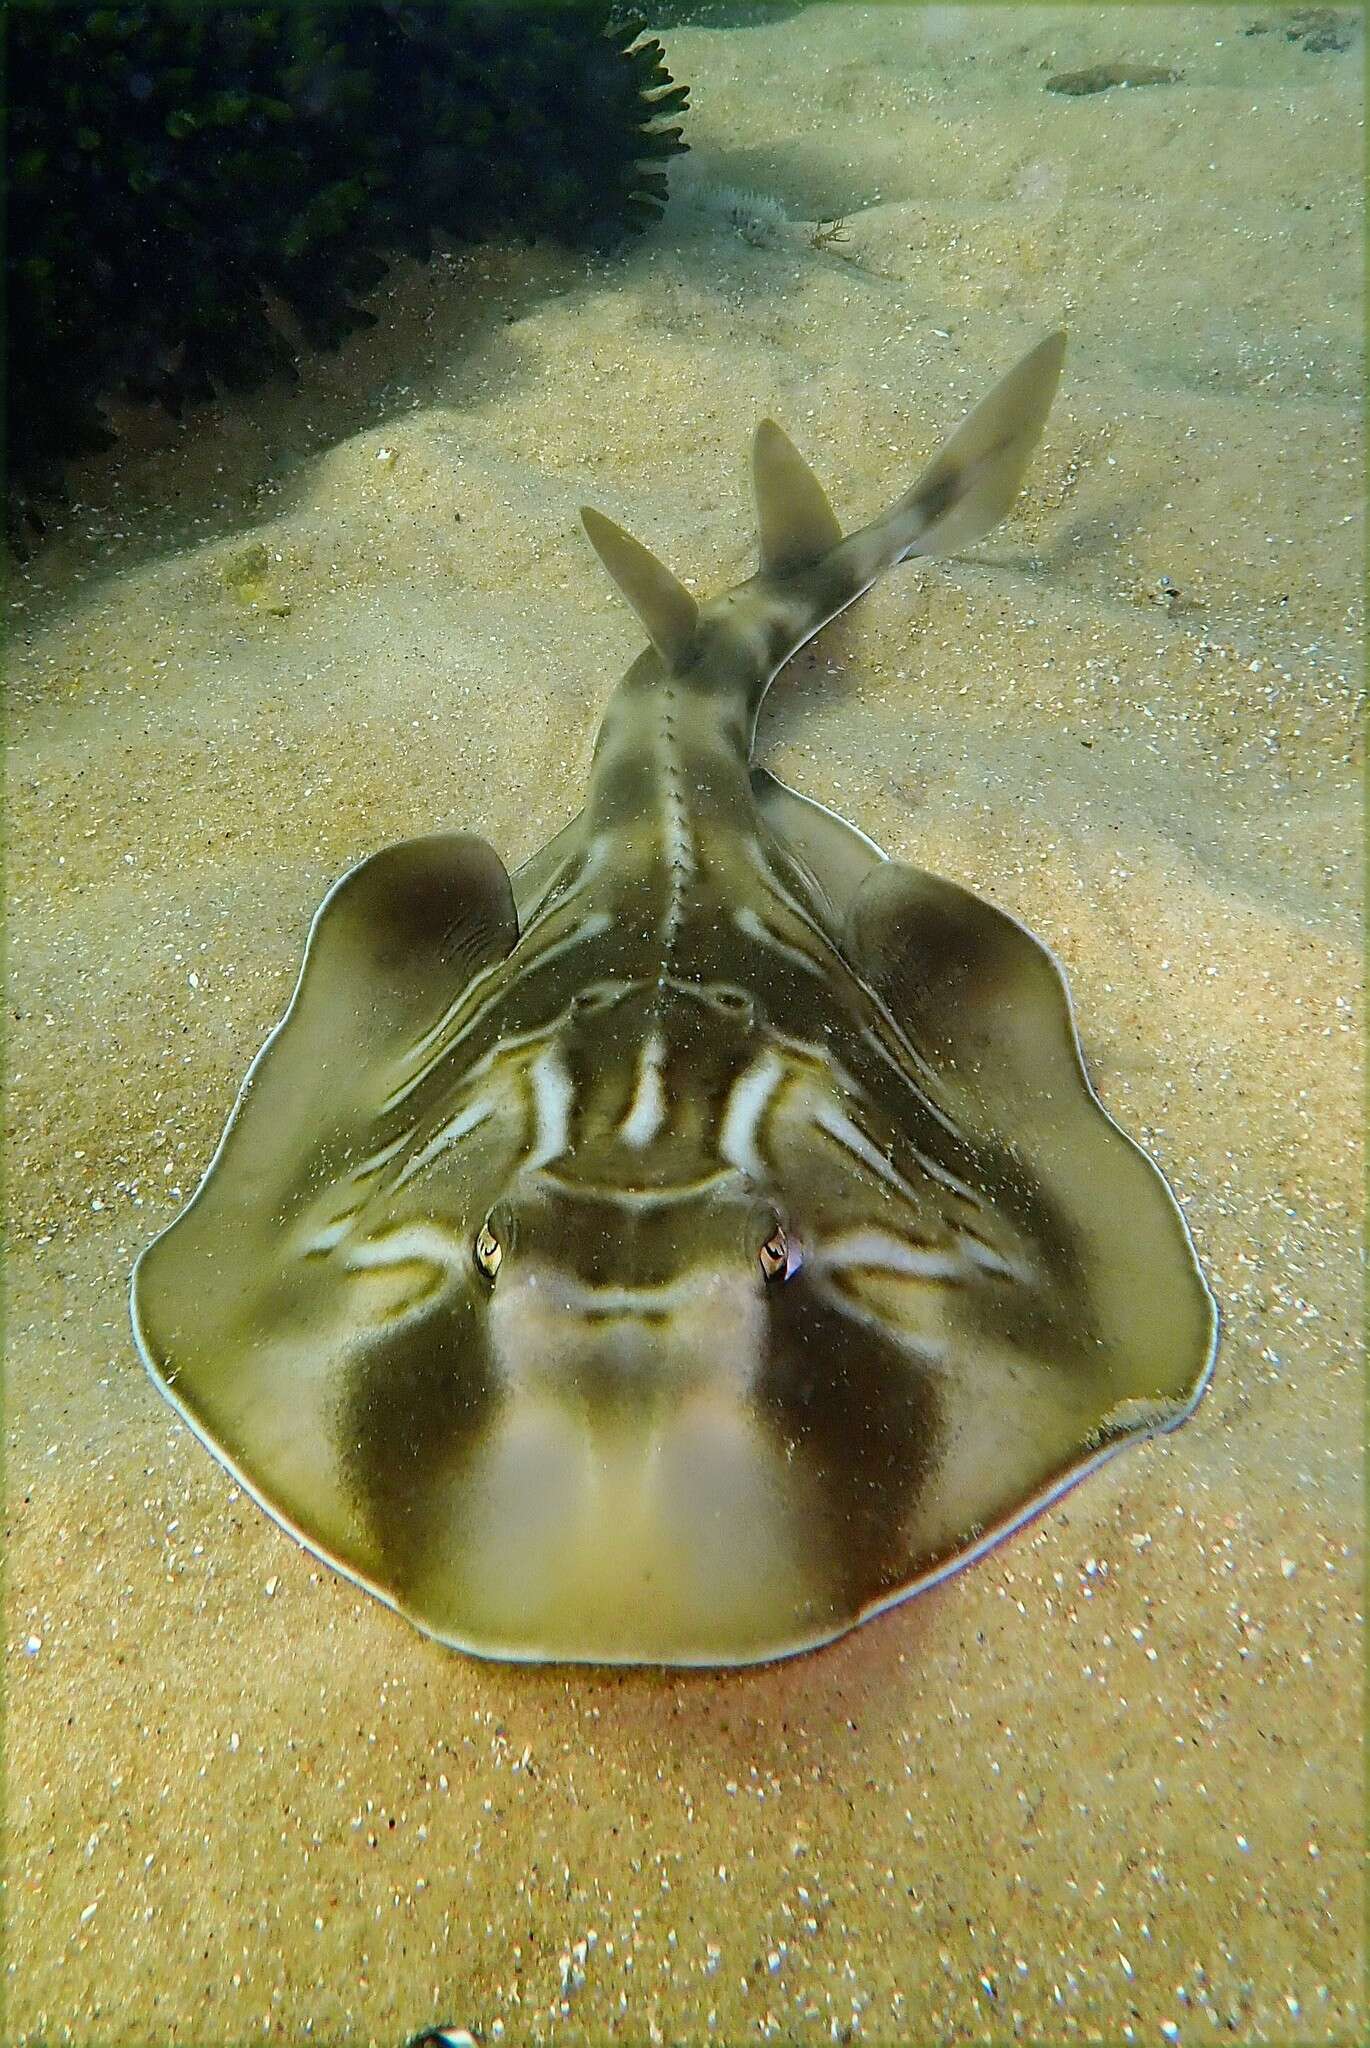 Image of Black and white fiddler ray